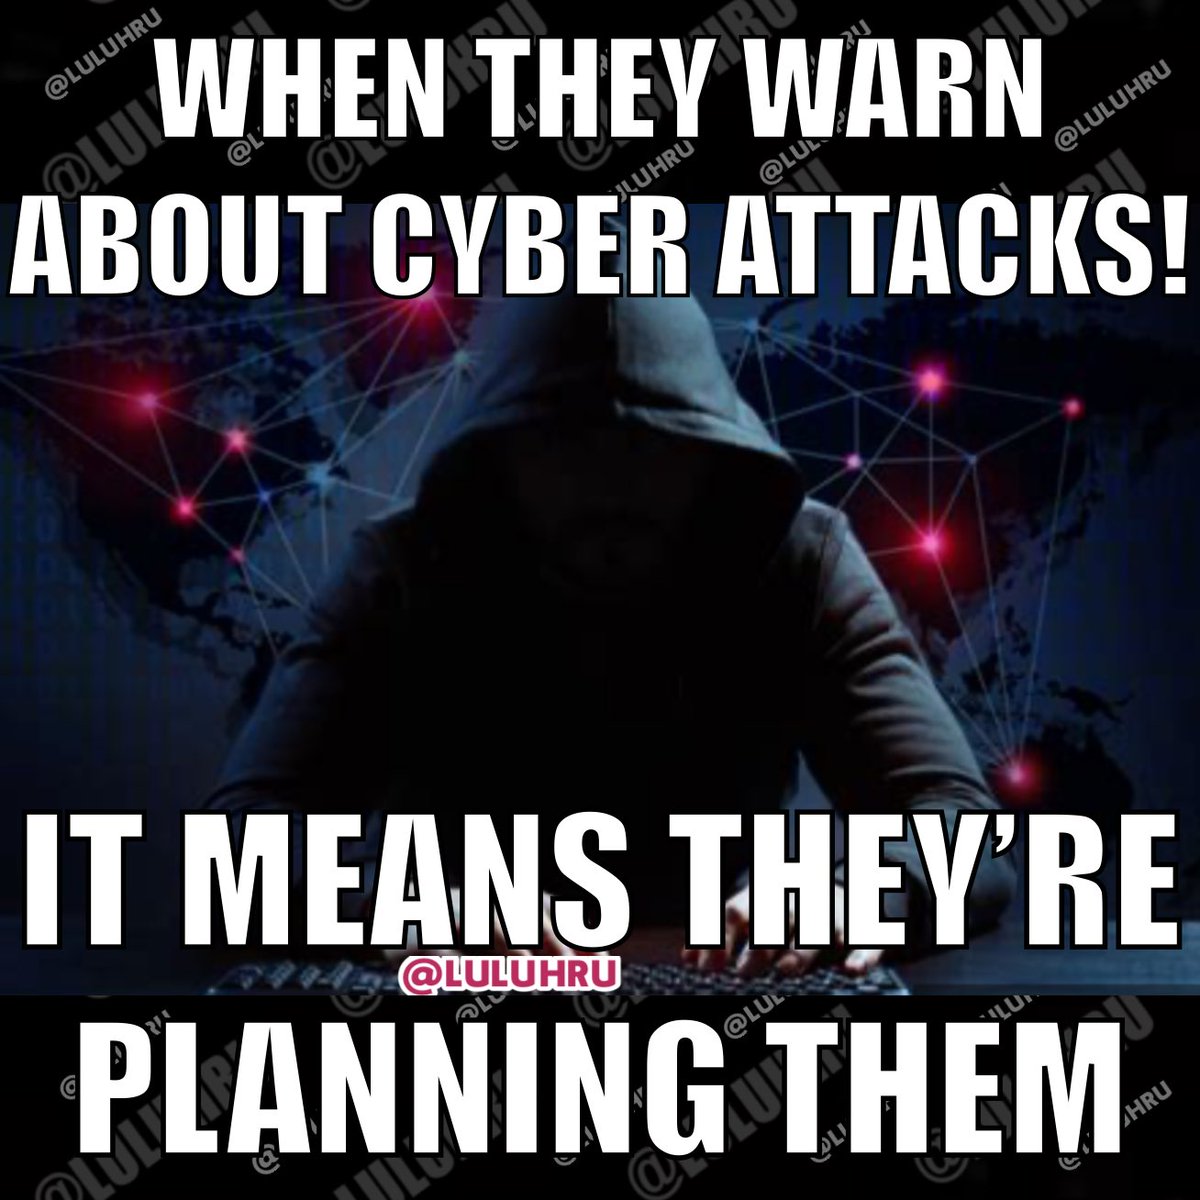 Did you know that many members of Congress invested in cyber security stocks within the last few months? It’s preprogramming for the planned election machine hack that will postpone our election!